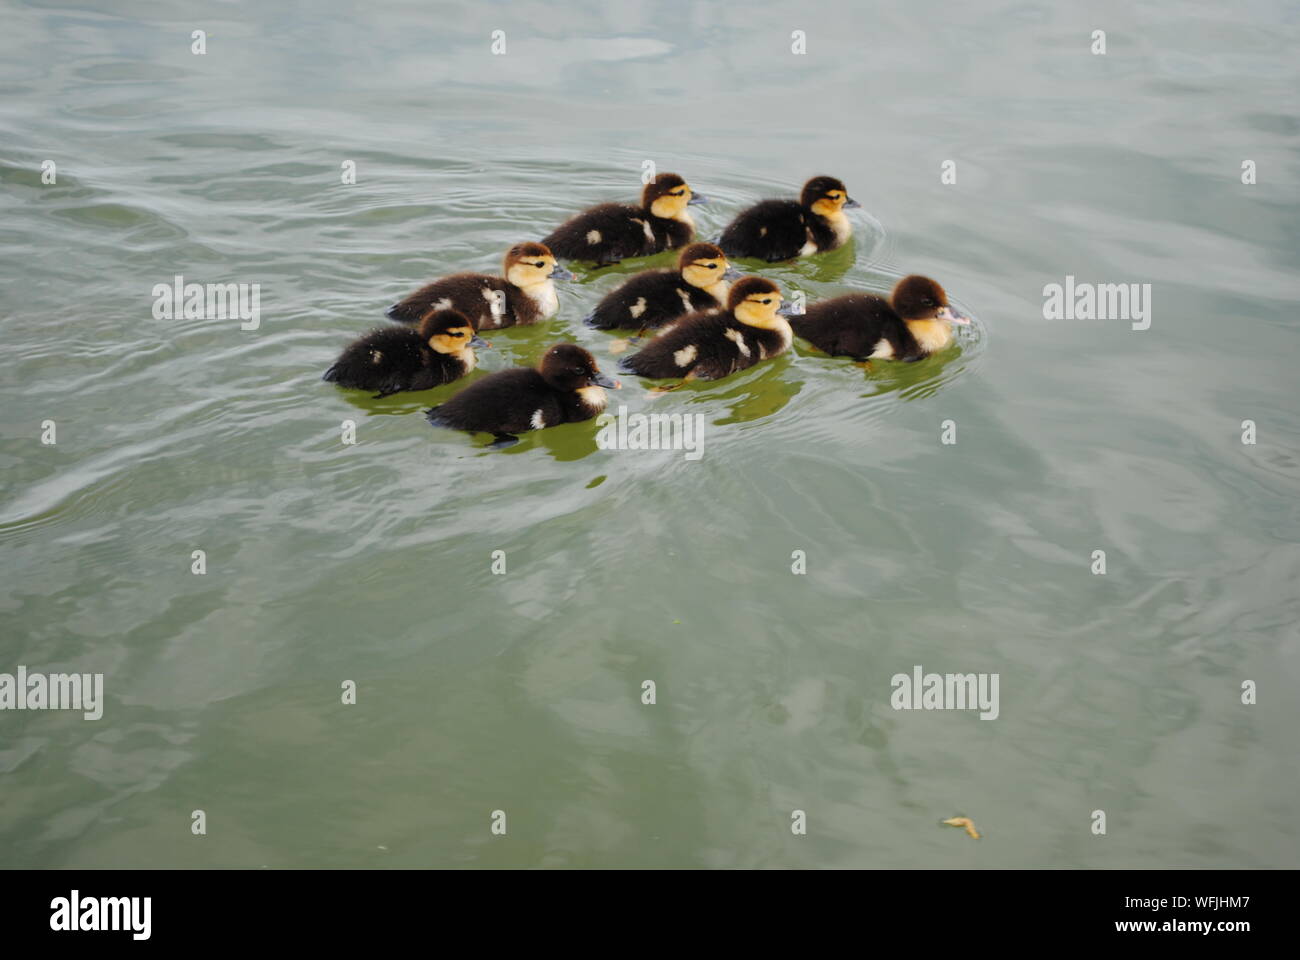 High Angle View Of Ducklings Swimming In Lake At Burke Crenshaw Park Stock Photo